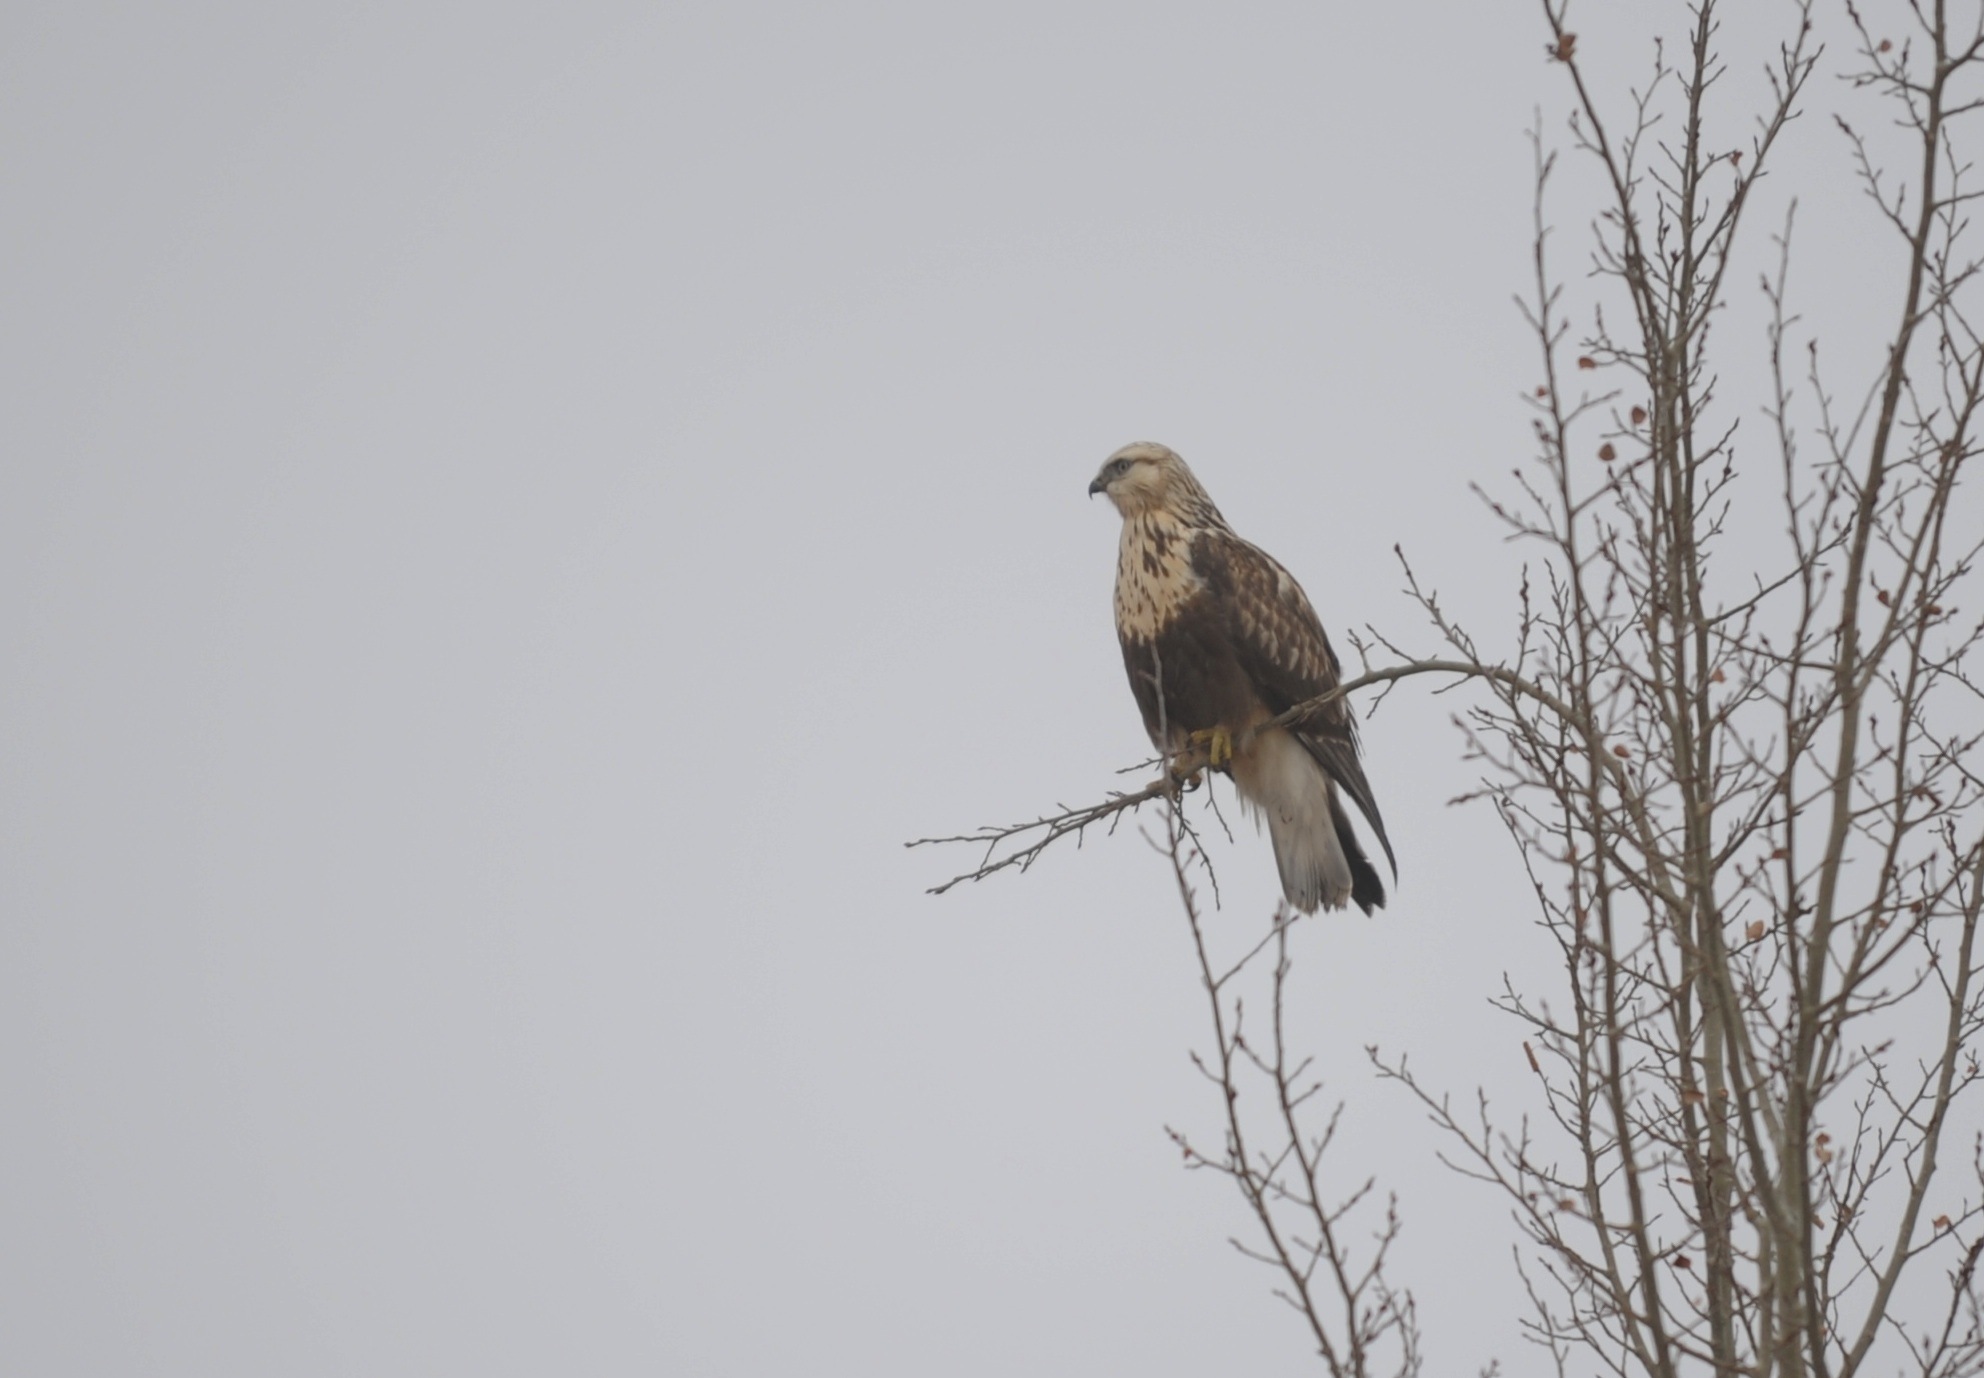 PERCHED-A hawk looks over the landscape in the Red Deer County area recently.